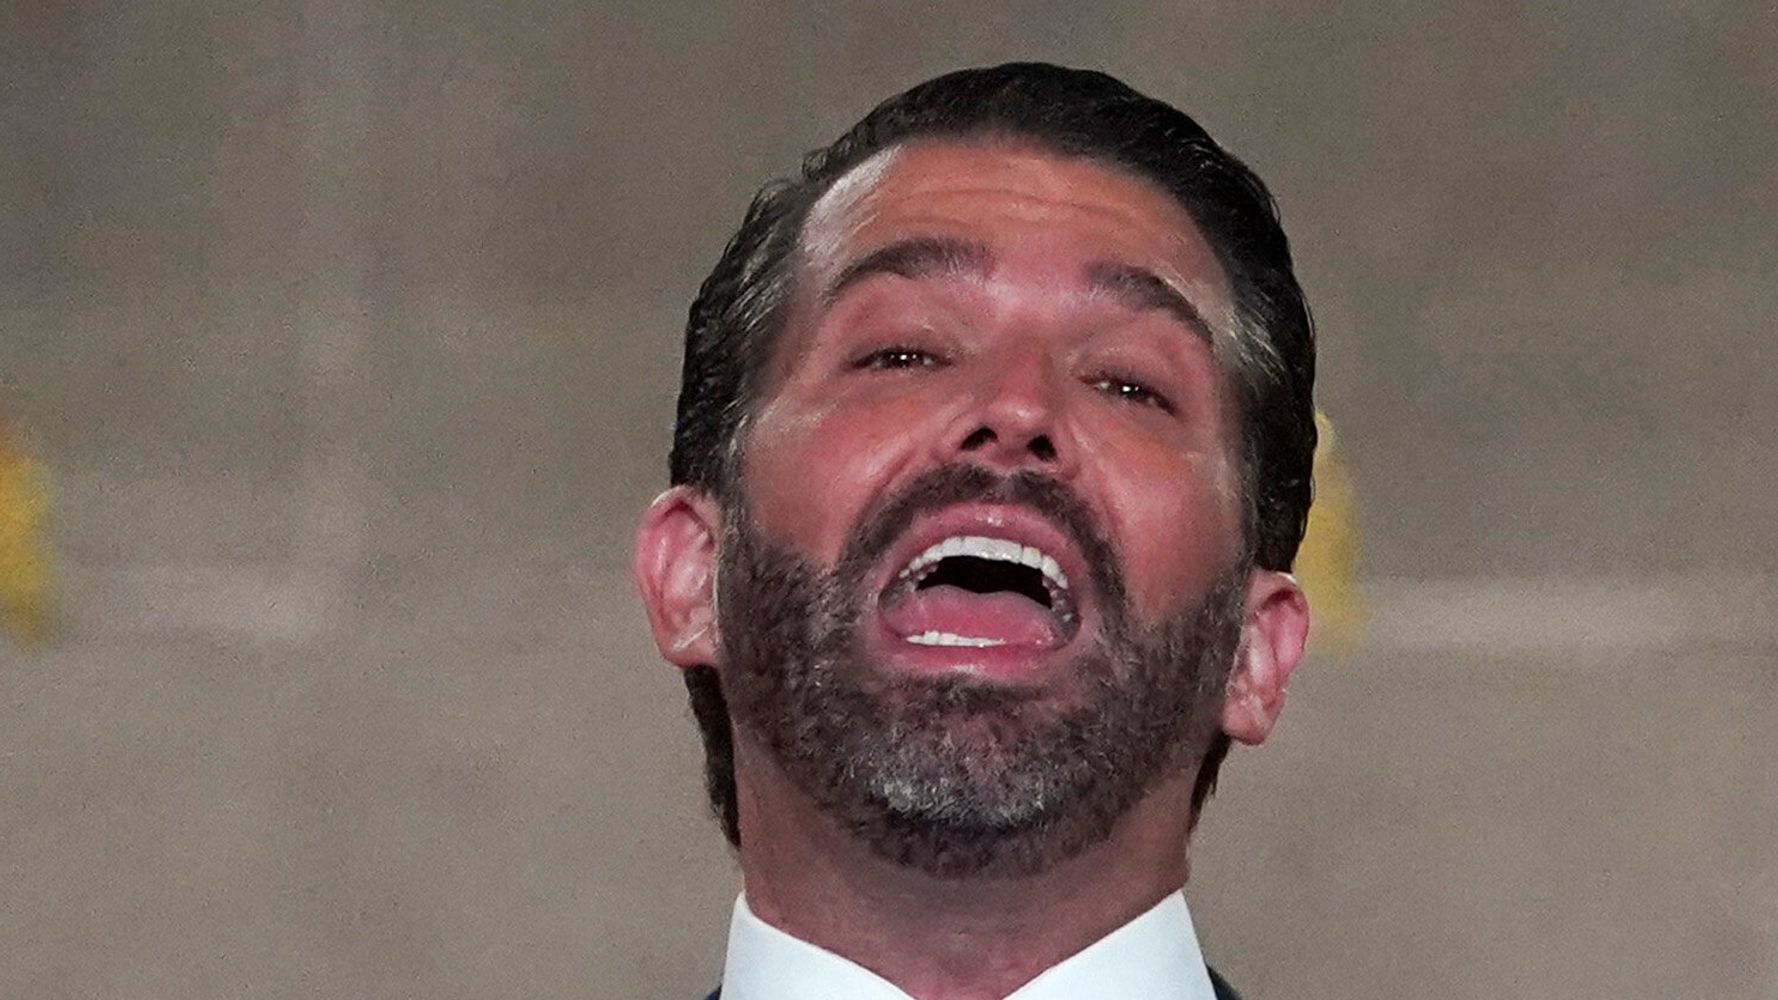 RNC Reportedly Dropped $300,000 To Buy Donald Trump Jr.’s Latest Book